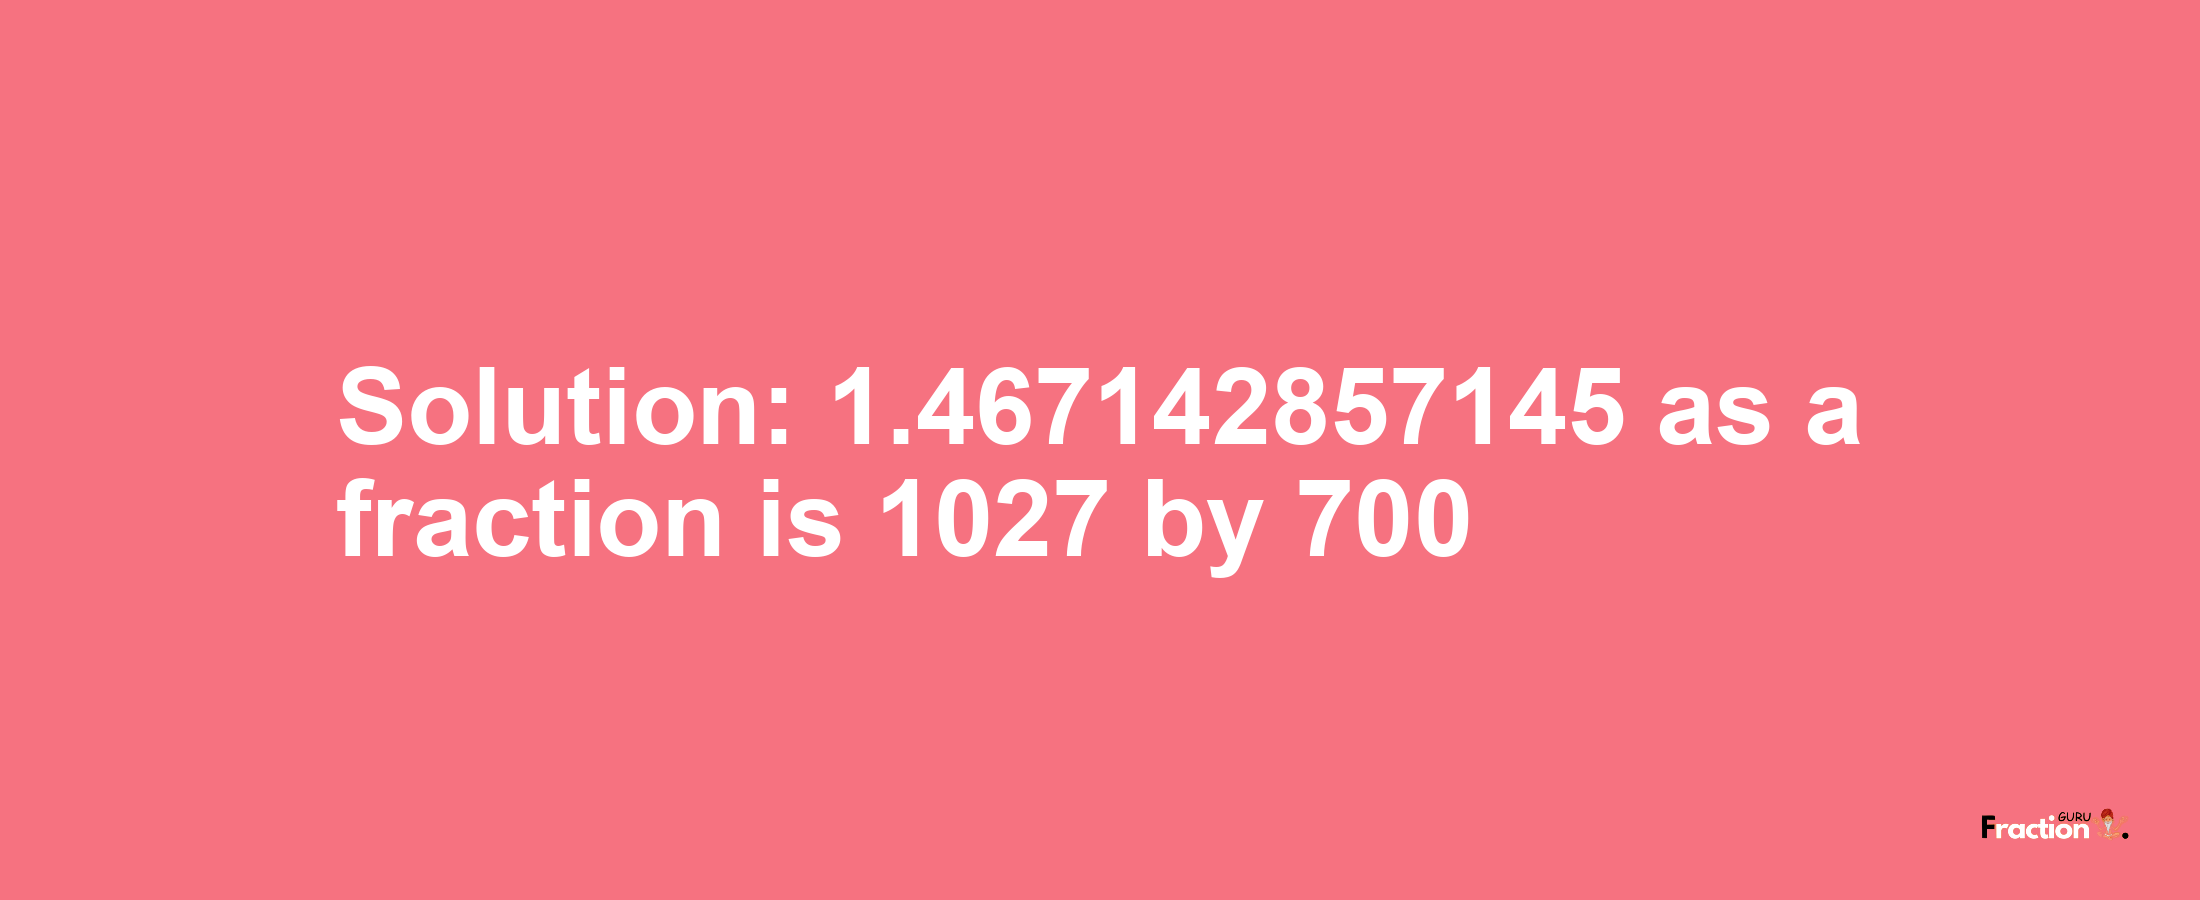 Solution:1.467142857145 as a fraction is 1027/700